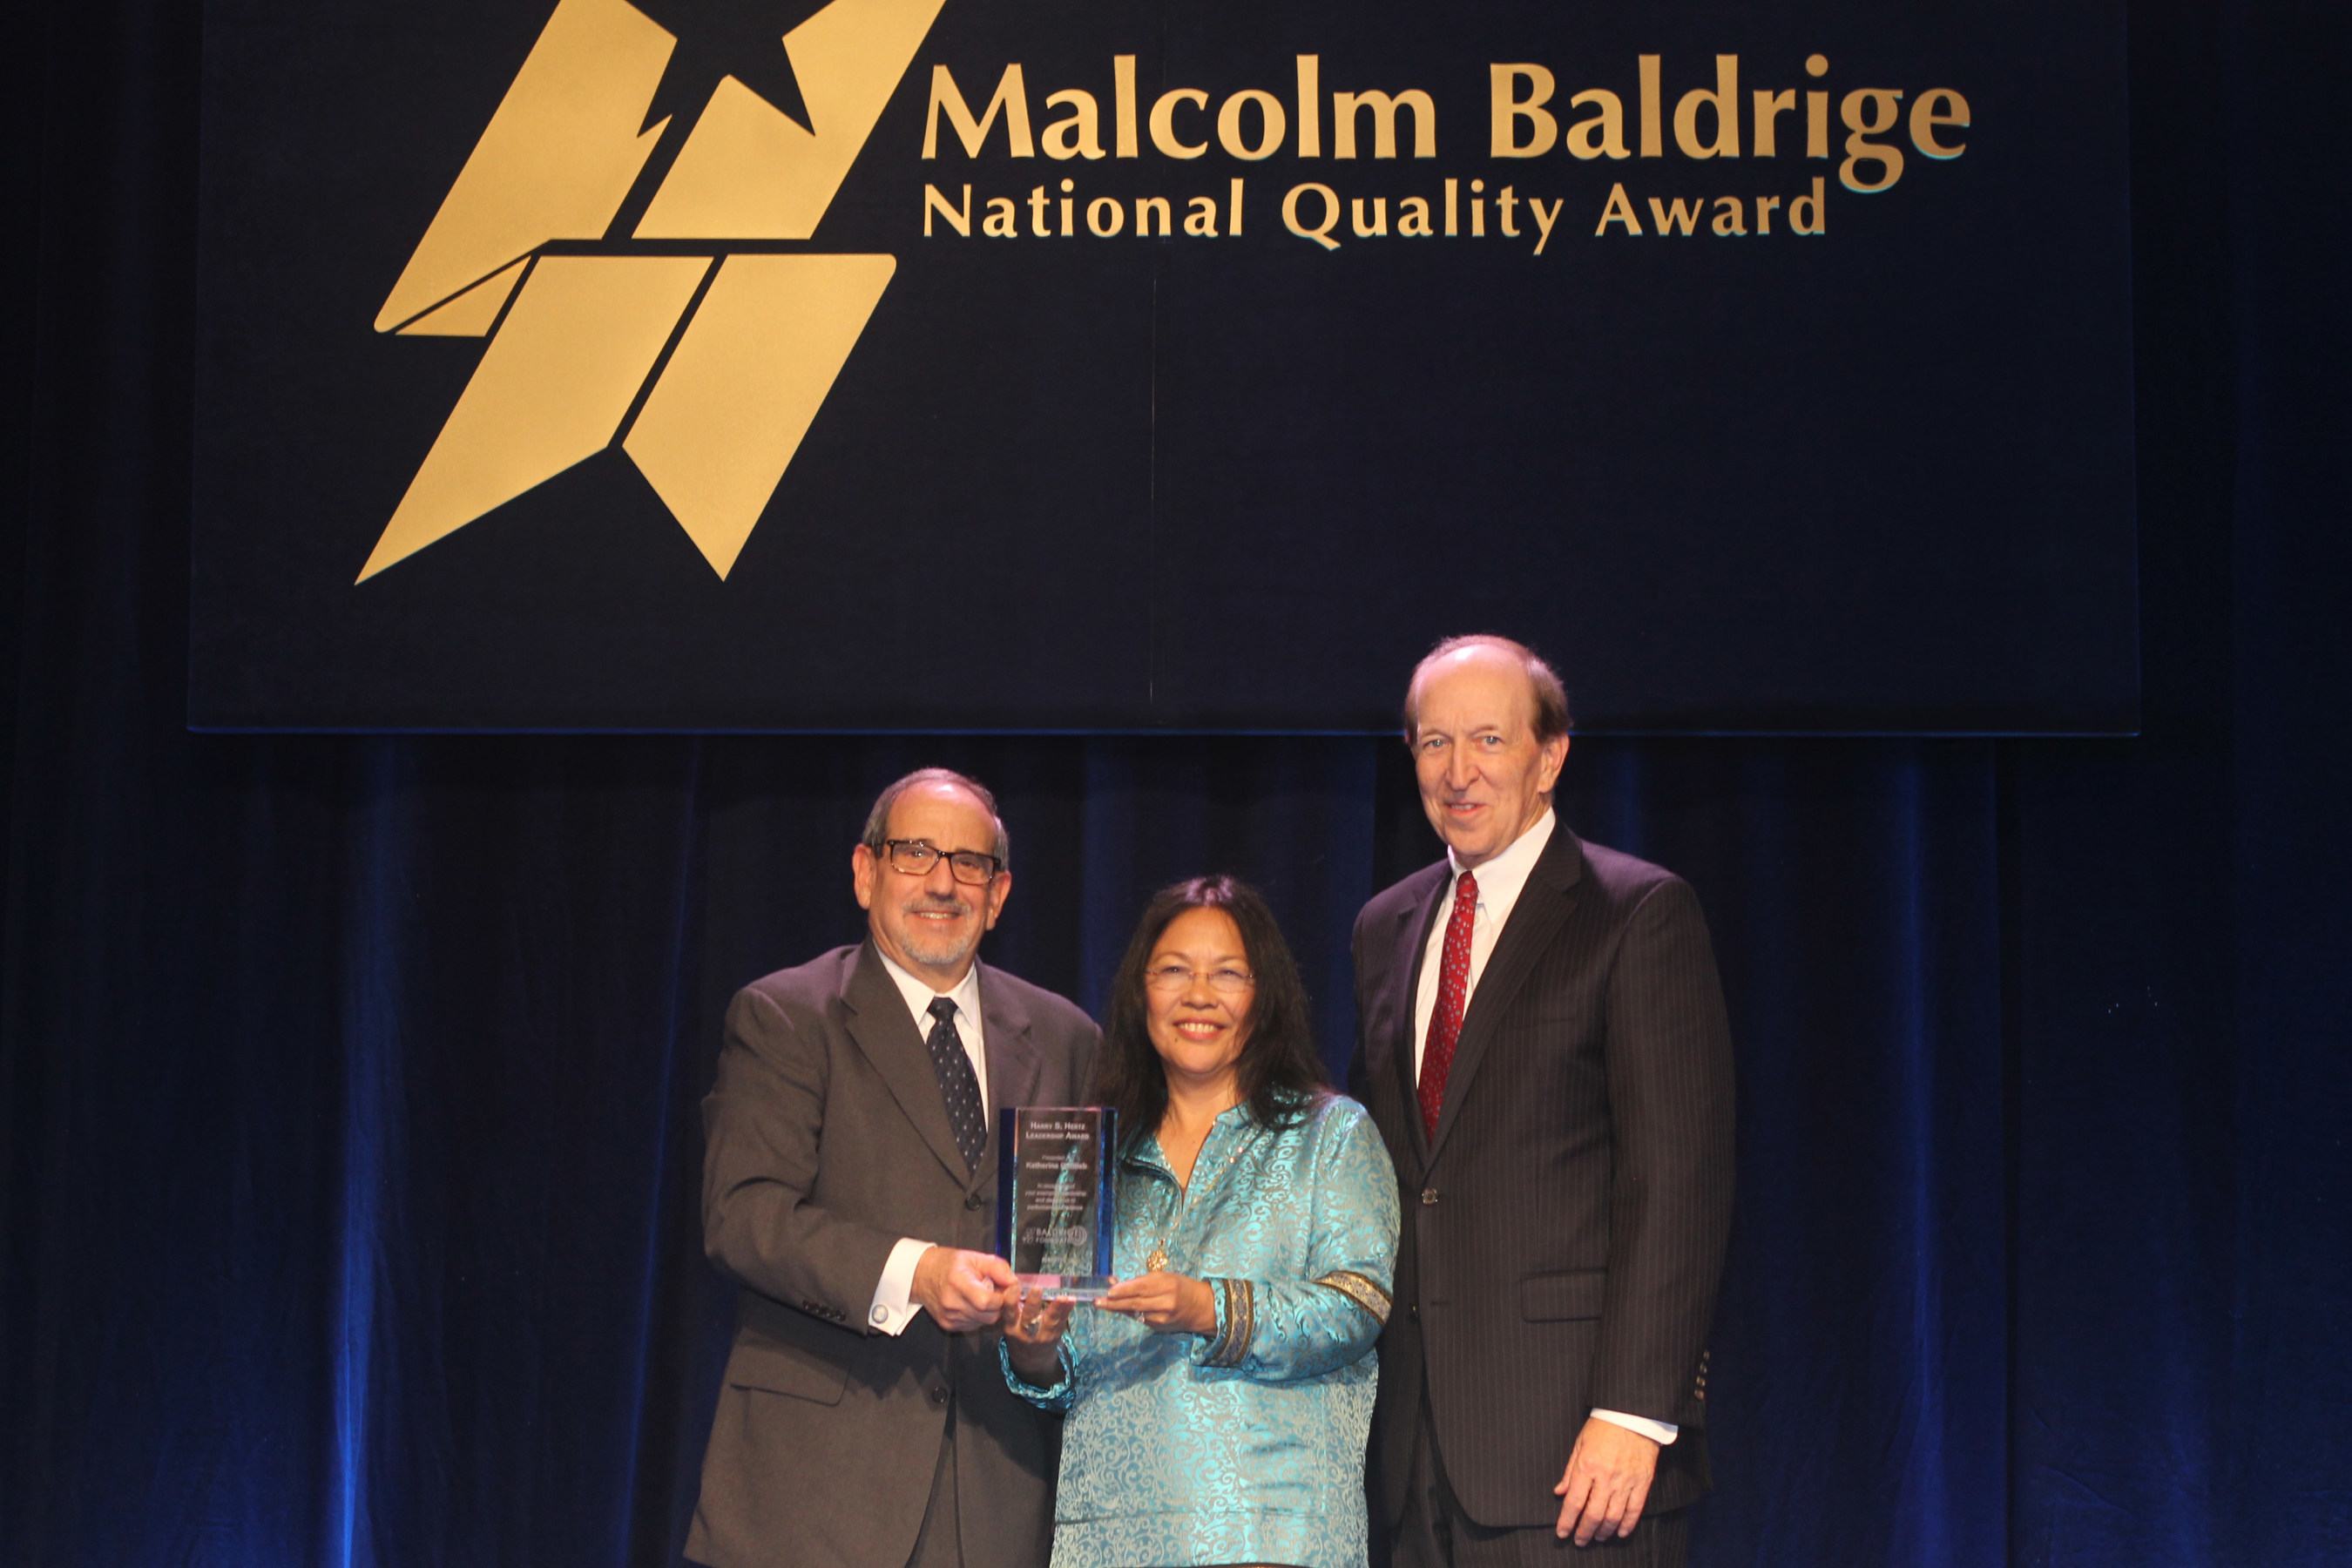 (Left-Right) 2013 HSHLA Recipient and Baldrige Performance Excellence Program Director Emeritus Harry S. Hertz, 2015 HSHLA Recipient and Southcentral Foundation President/CEO Dr. Katherine Gottlieb and Baldrige Foundation Chair Dr. P. George Benson